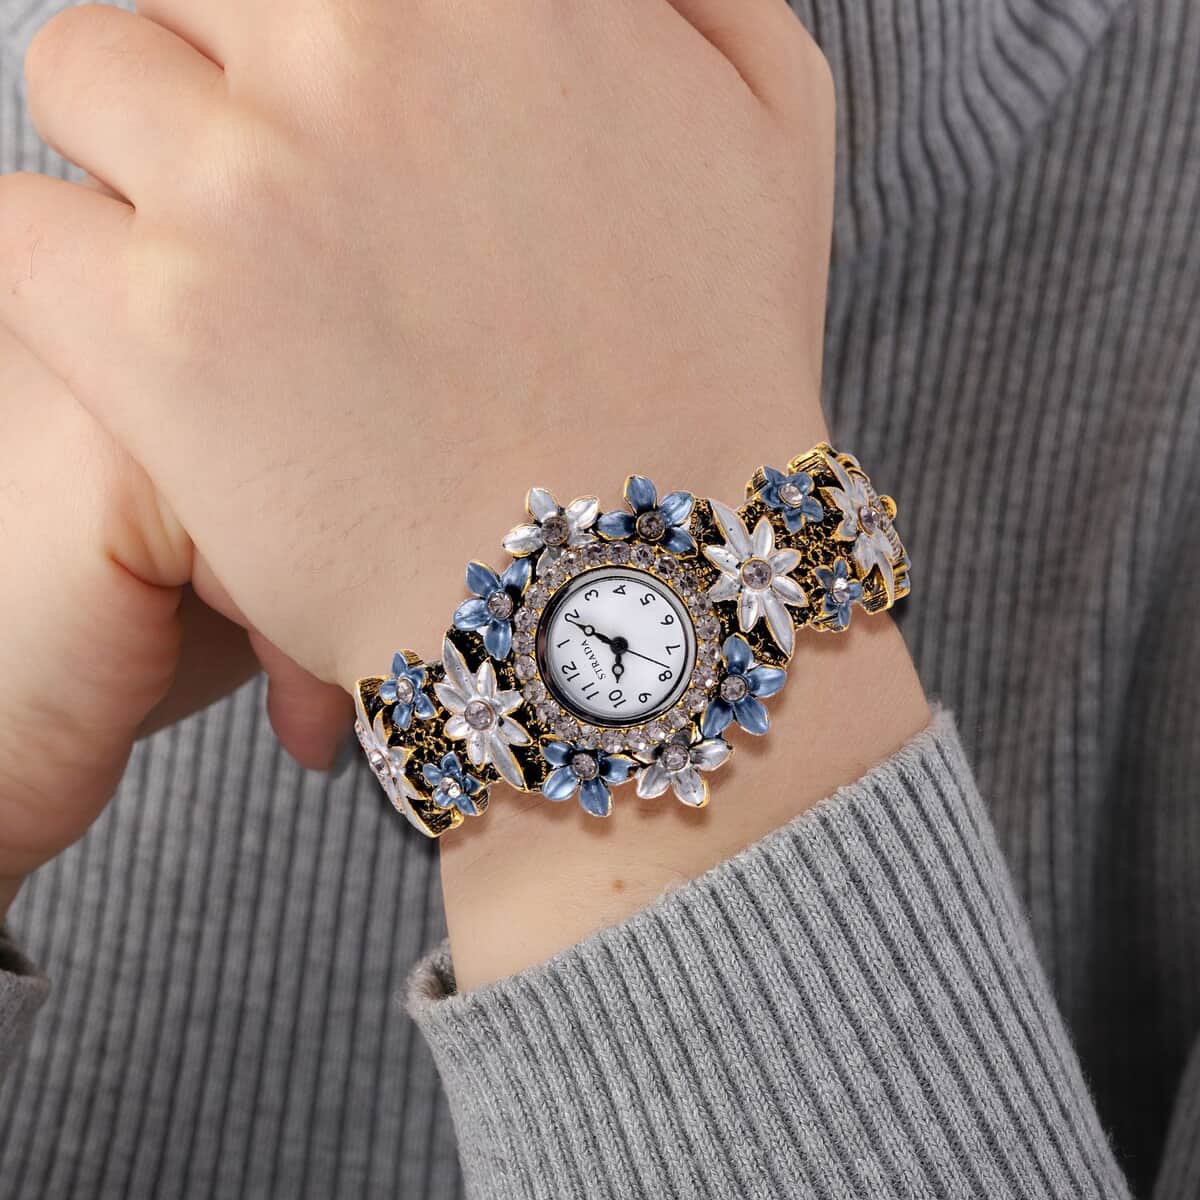 Strada Gray Color Austrian Crystal Japanese Movement Flower Pattern Bangle Watch in Black Oxidized Bronze Plating (39.37 mm) (6.50-6.75 Inches) image number 2